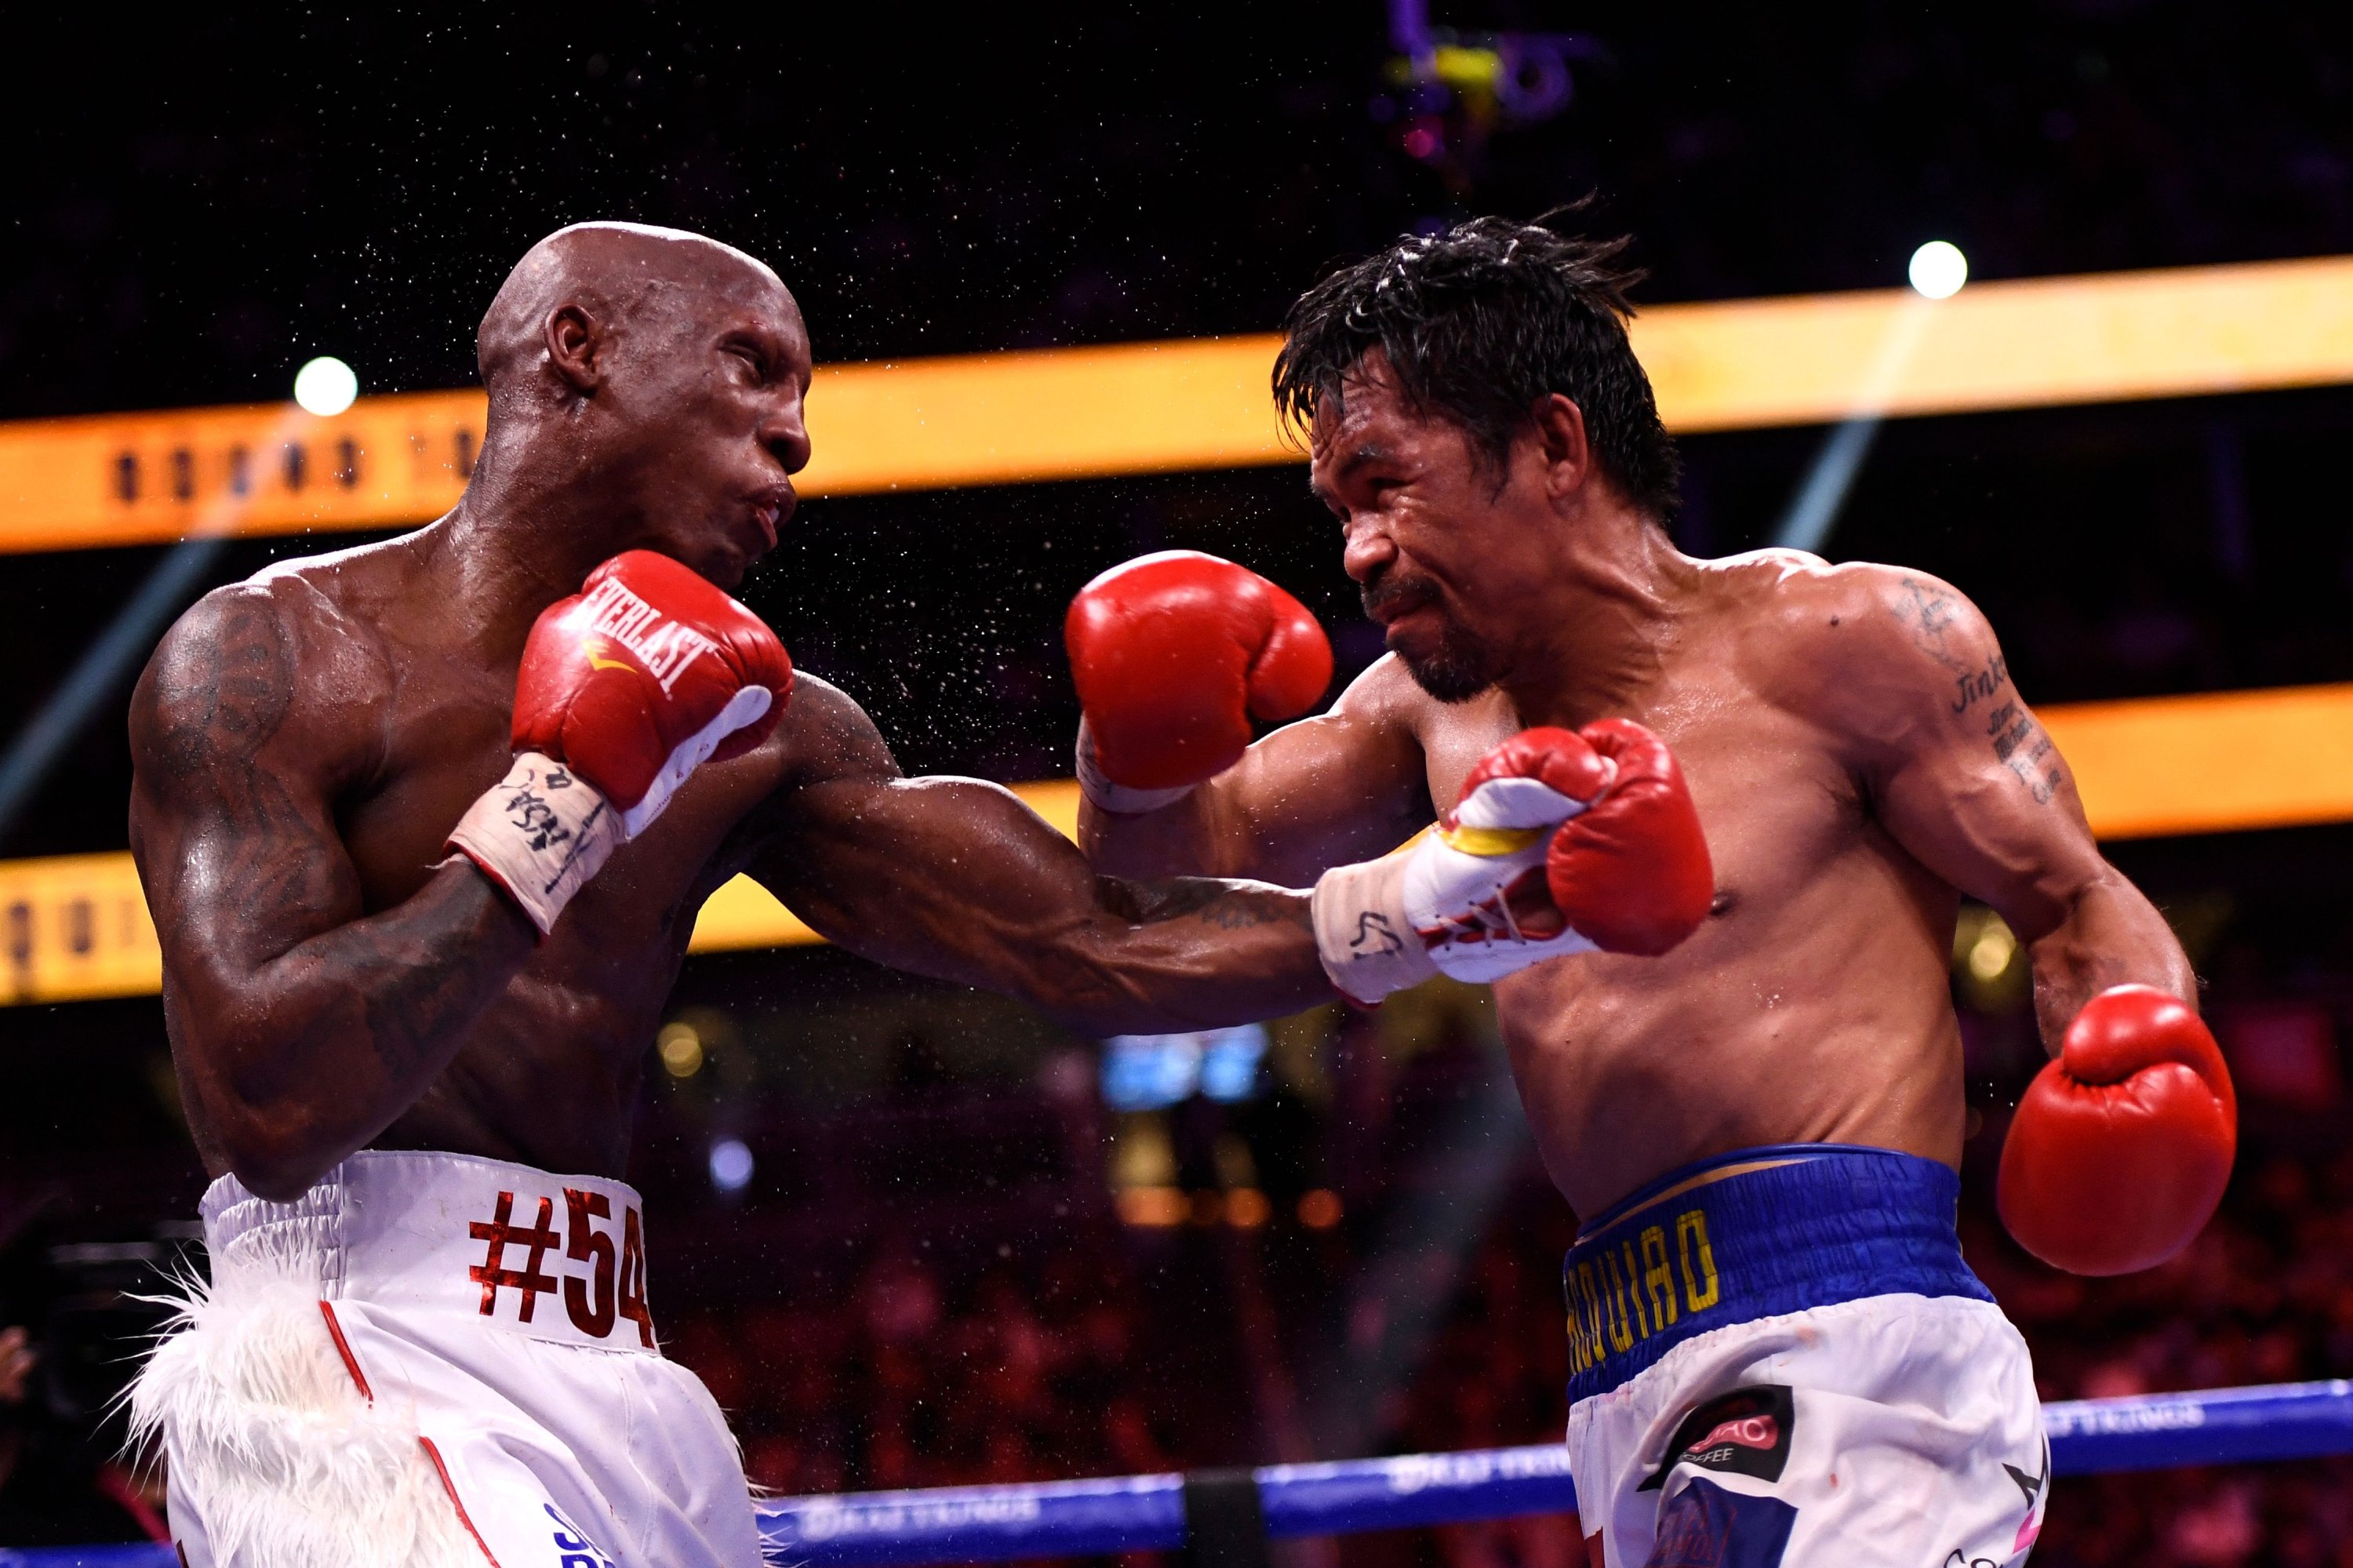 Boxing legend Pacquiao may hang up gloves after Ugas upset | Daily Sabah